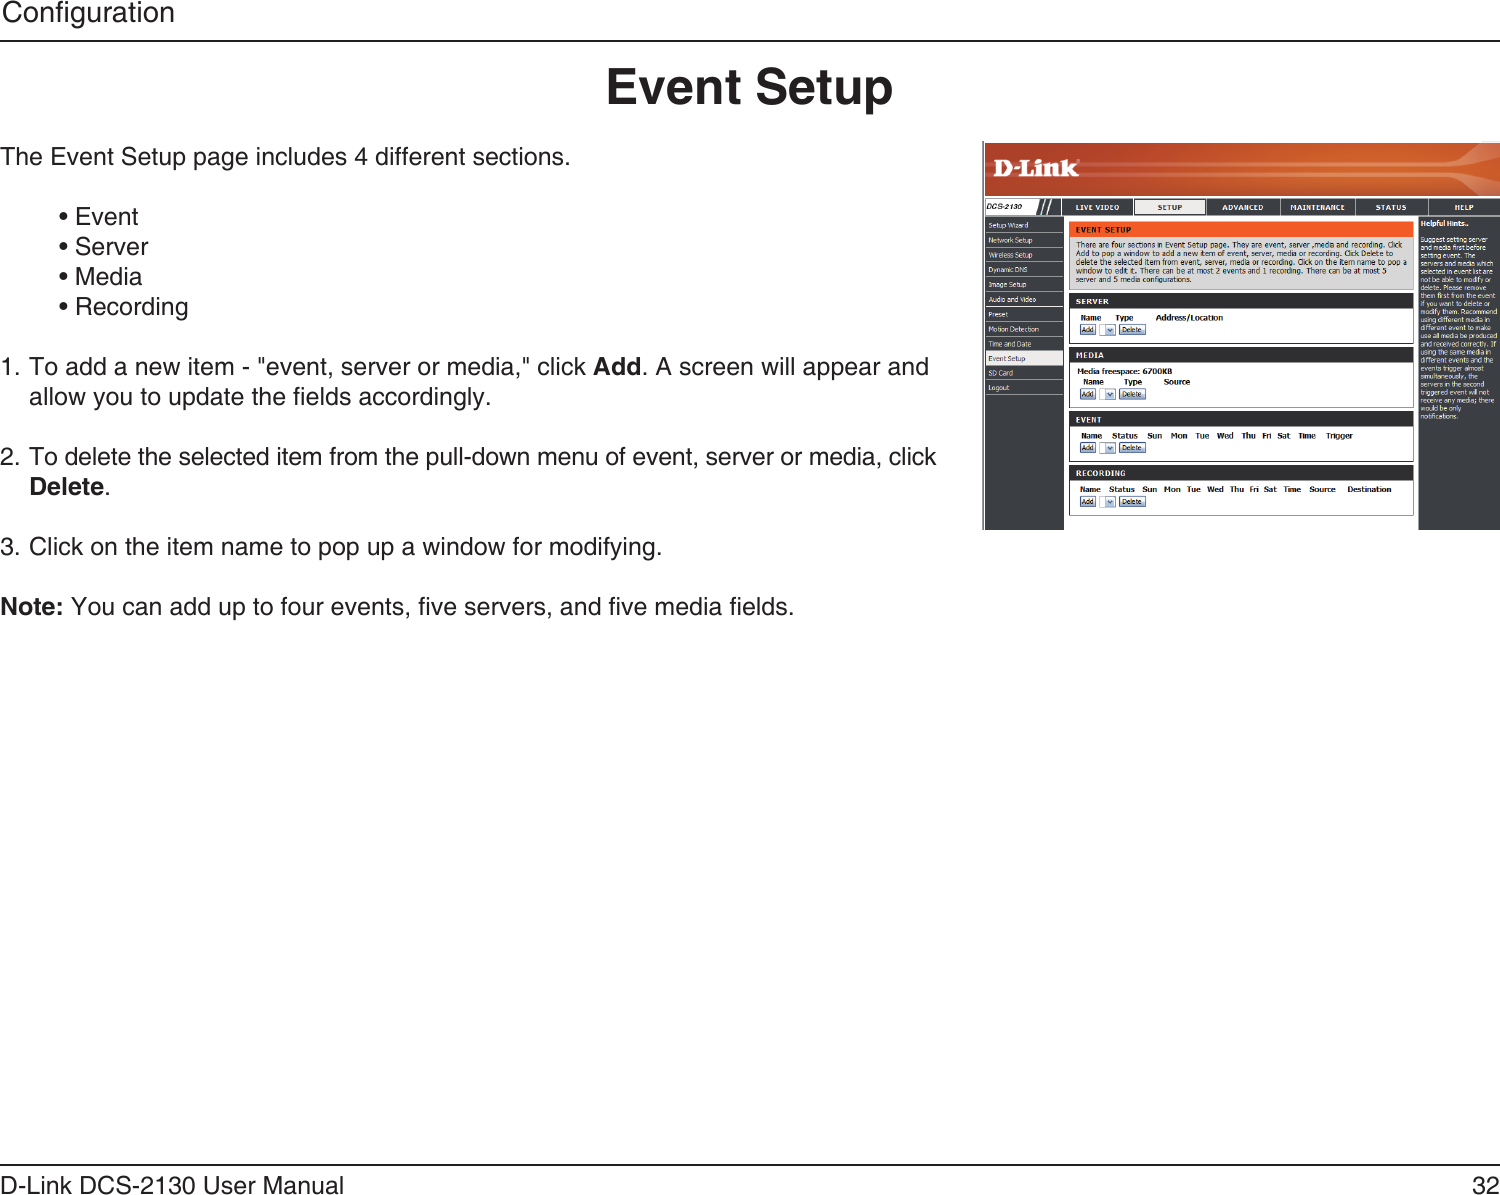 32D-Link DCS-2130 User ManualCongurationEvent SetupThe Event Setup page includes 4 different sections.• Event• Server • Media• Recording1. To add a new item - &quot;event, server or media,&quot; click Add. A screen will appear and allow you to update the elds accordingly.2. To delete the selected item from the pull-down menu of event, server or media, click Delete. 3. Click on the item name to pop up a window for modifying.Note: You can add up to four events, ve servers, and ve media elds.